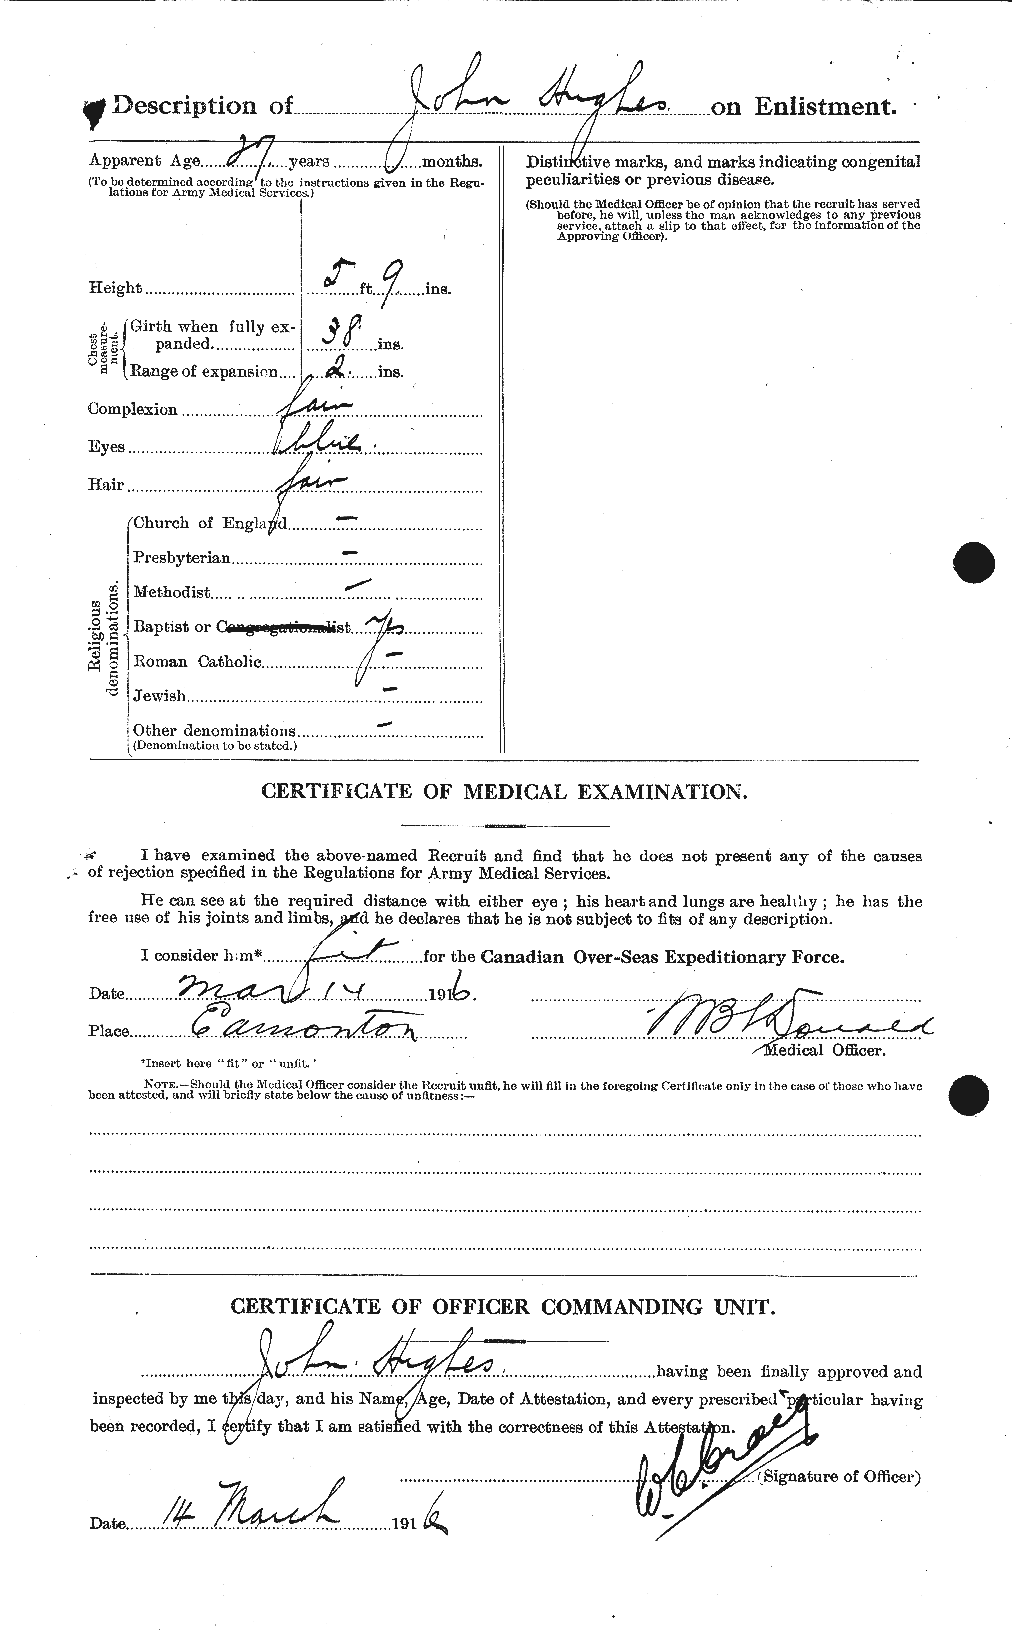 Personnel Records of the First World War - CEF 403989b